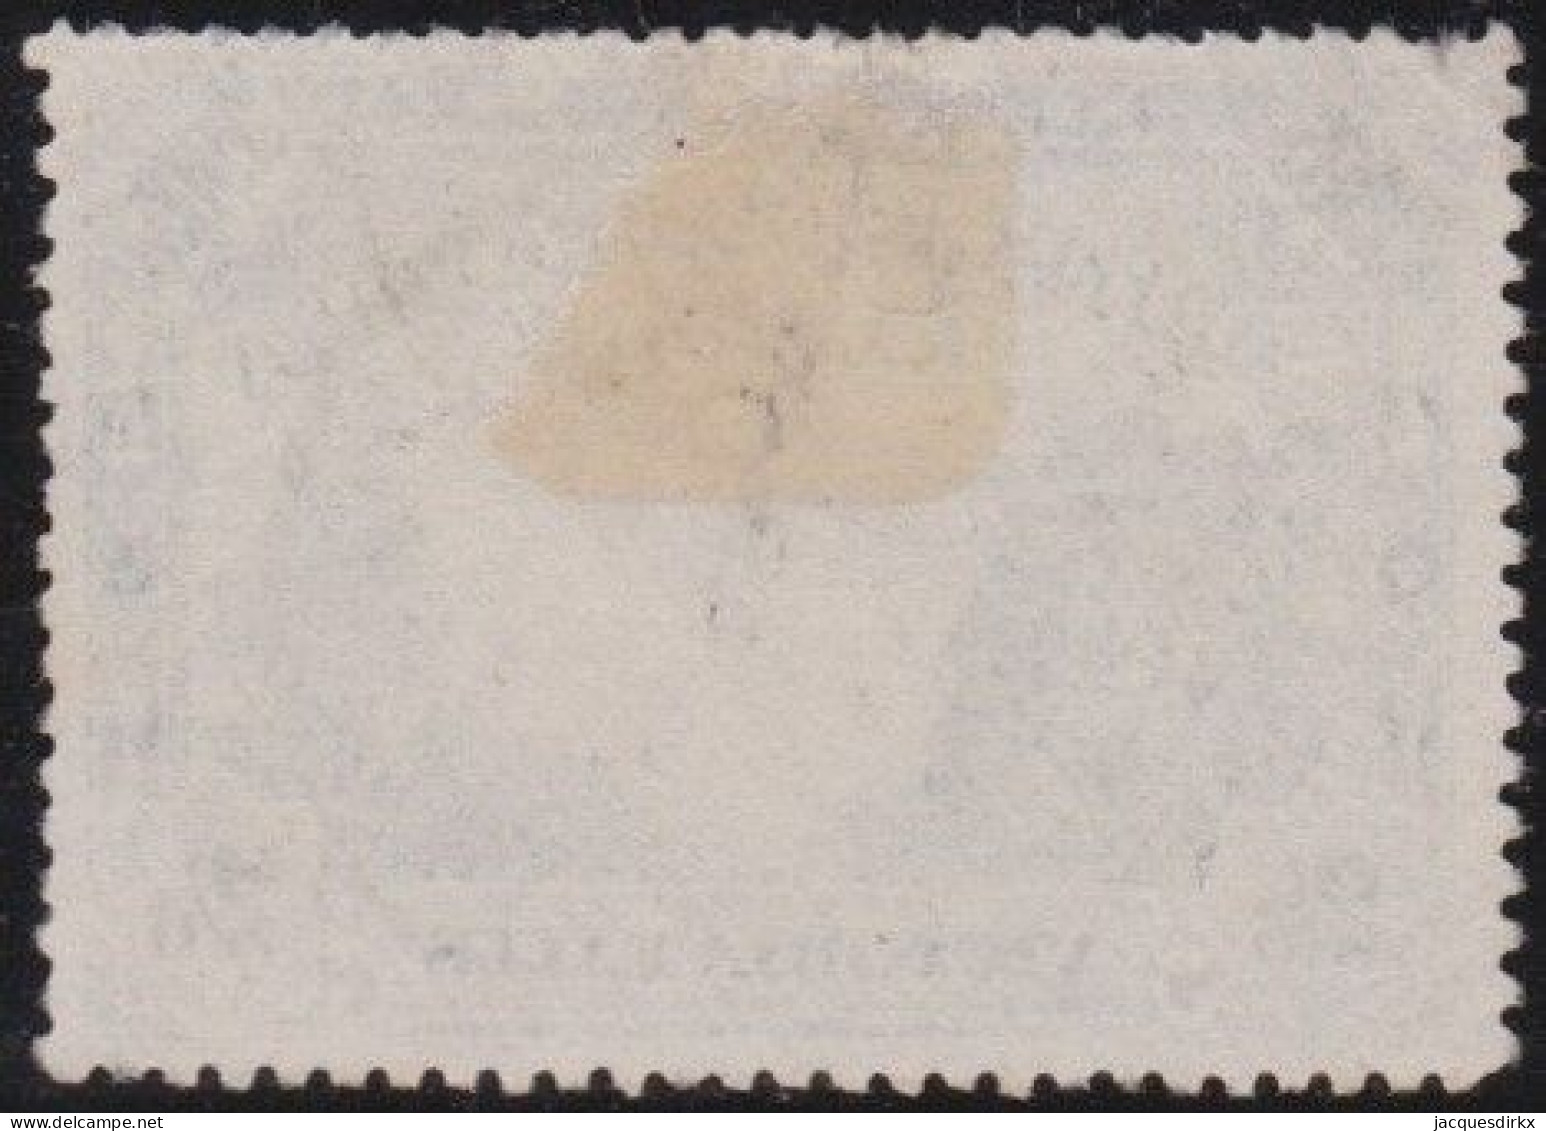 British South Africa Company      .    SG  .   98  (2 Scans)       .  O   .   Cancelled - Gebruikt